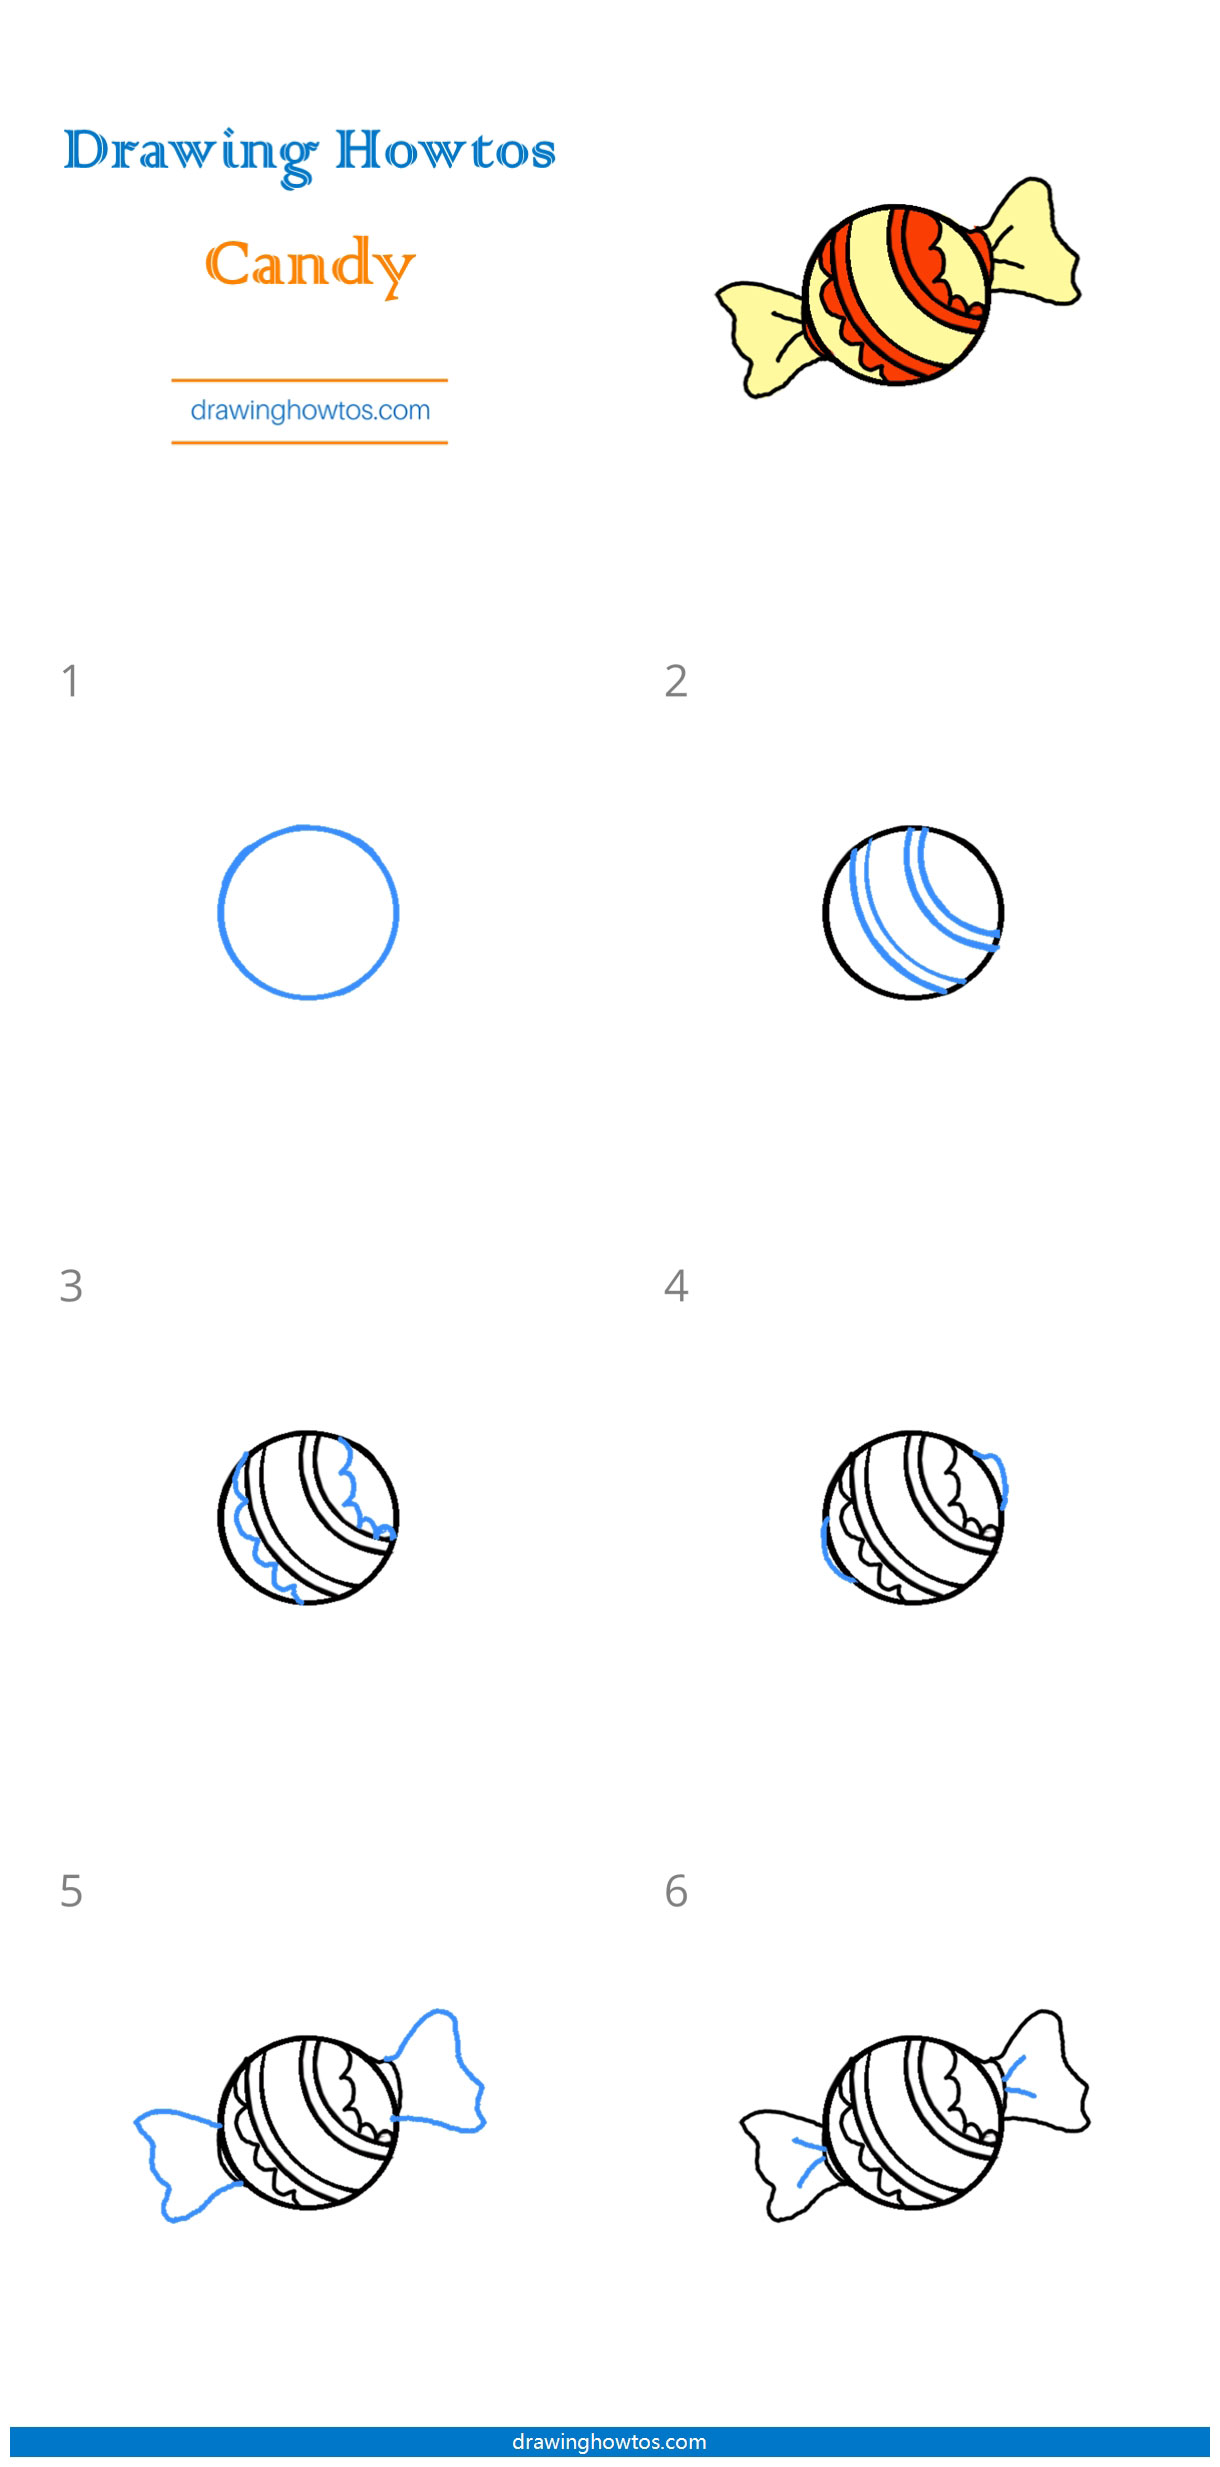 How to Draw Candy Step by Step